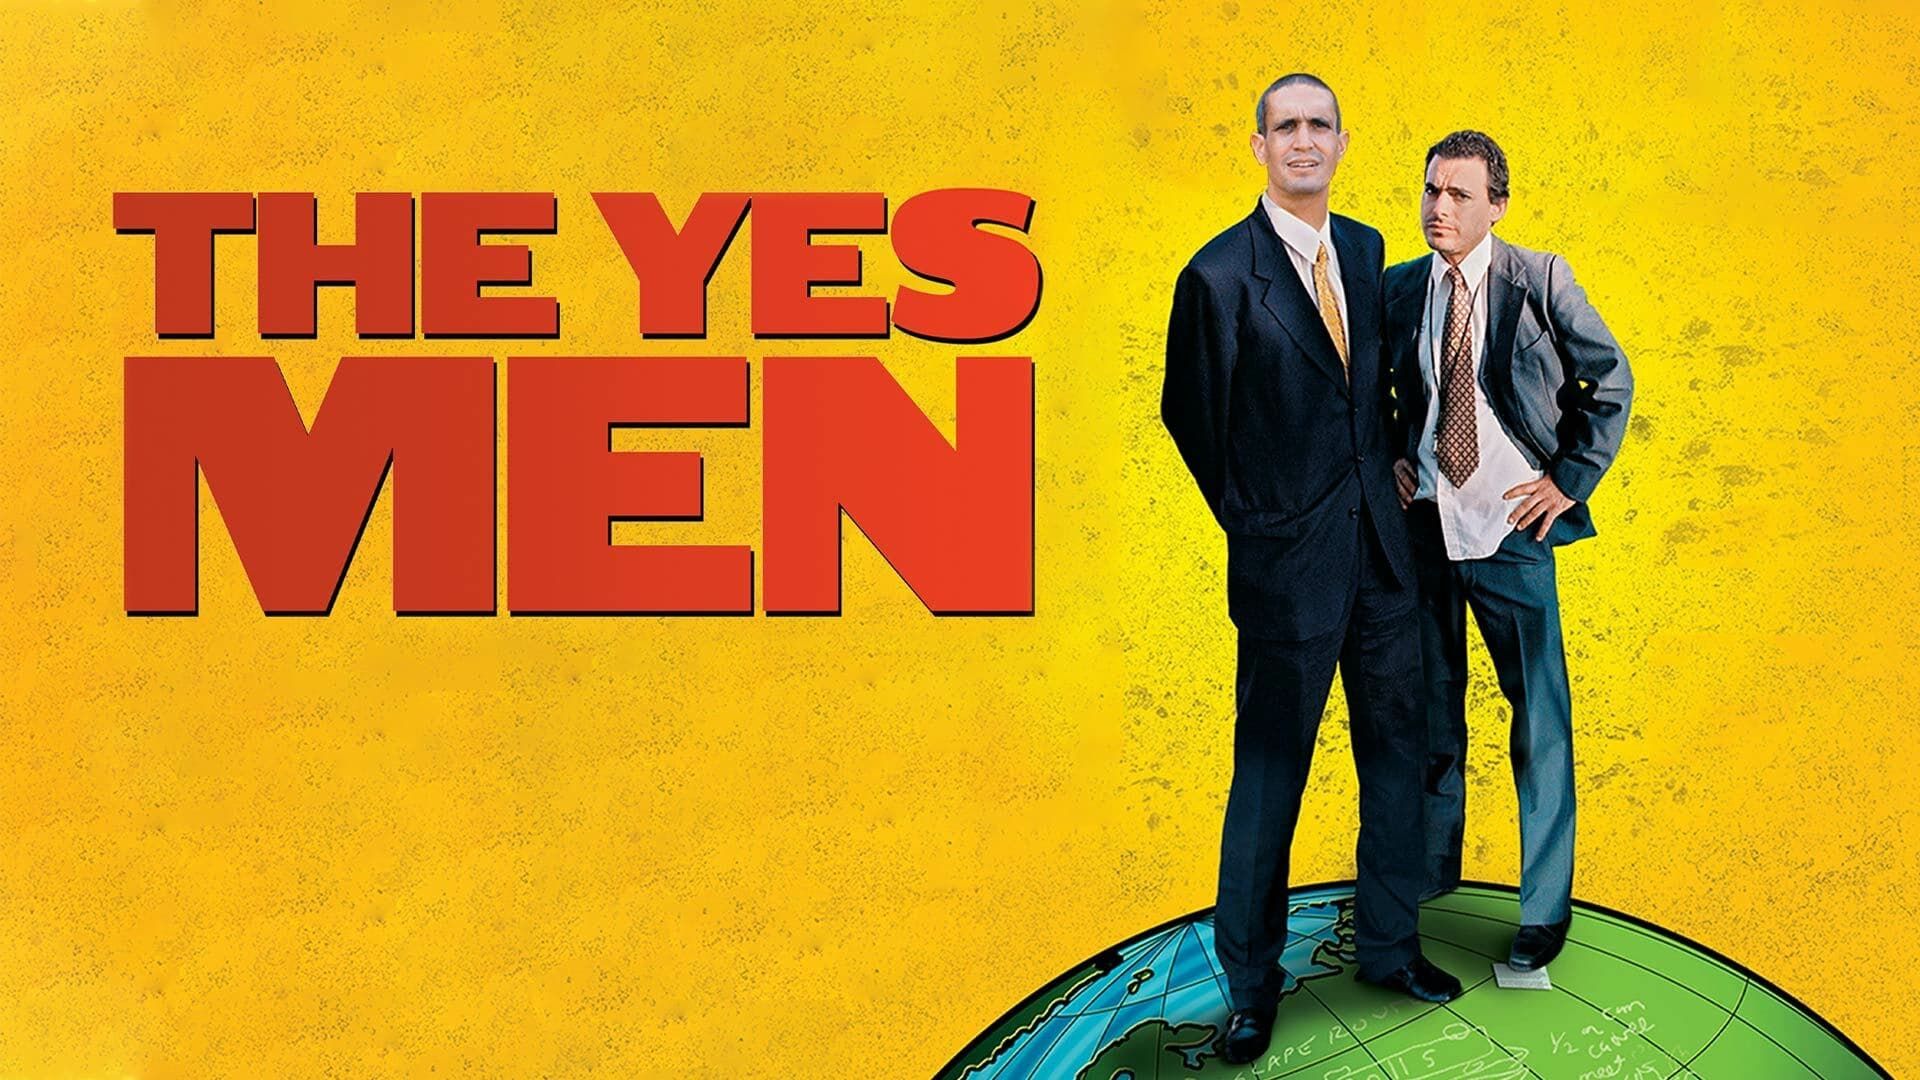 The Yes Men background